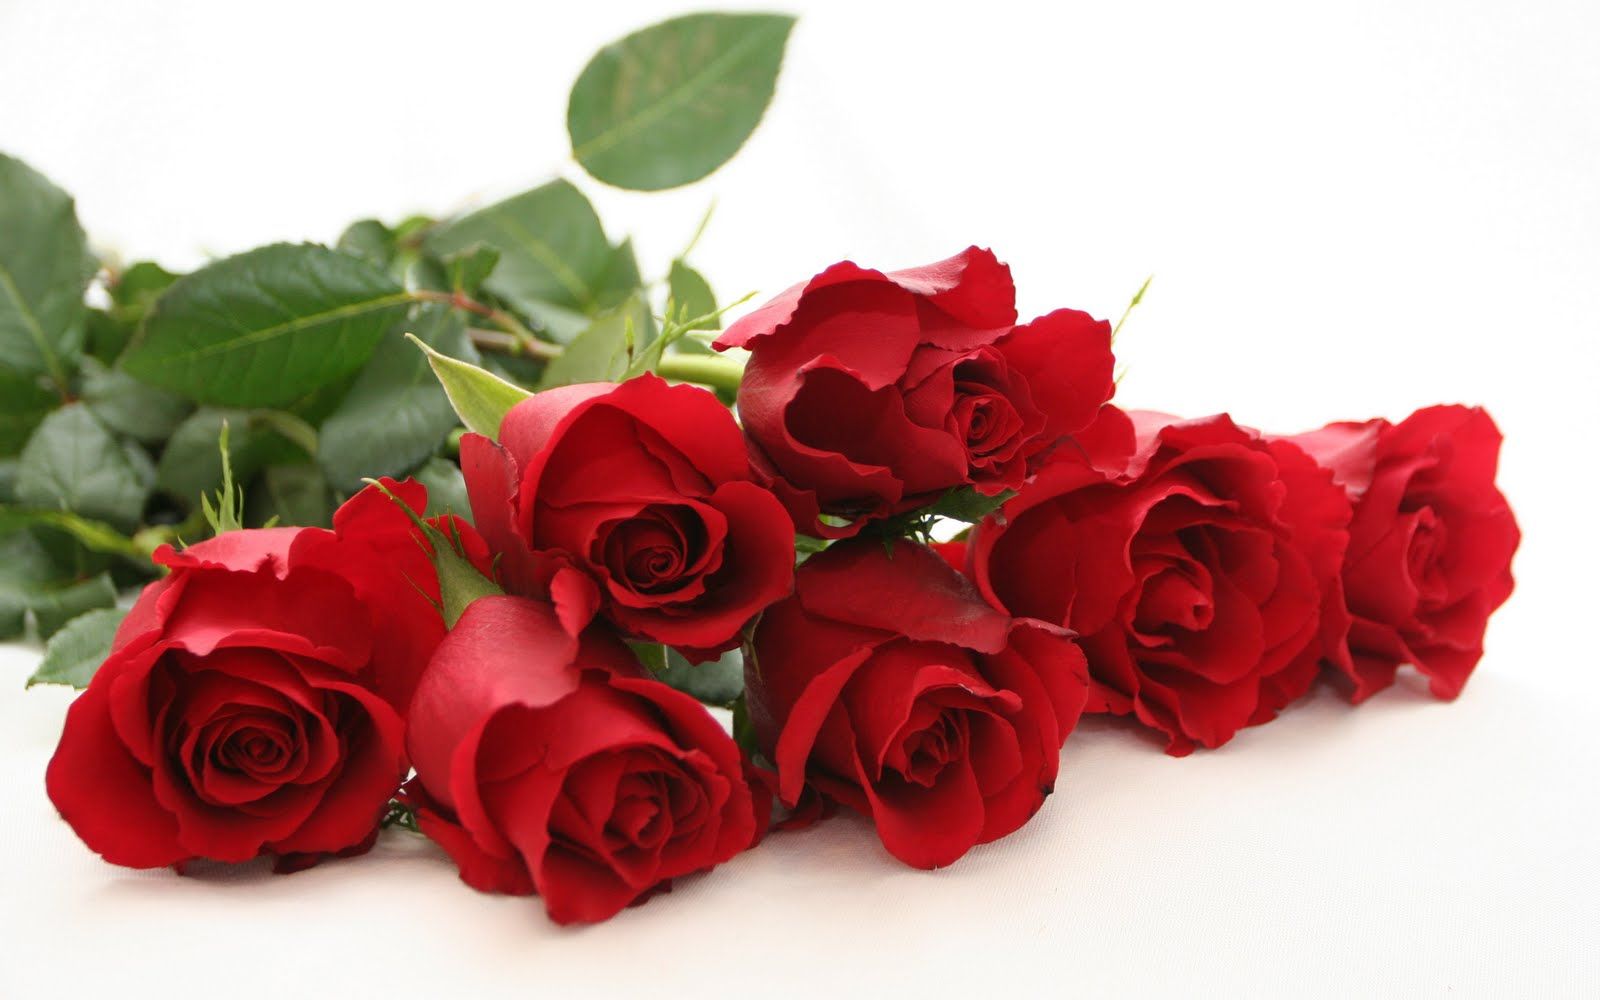 Red Rose HD Wallpaper, Red Rose Photos, New Wallpapers